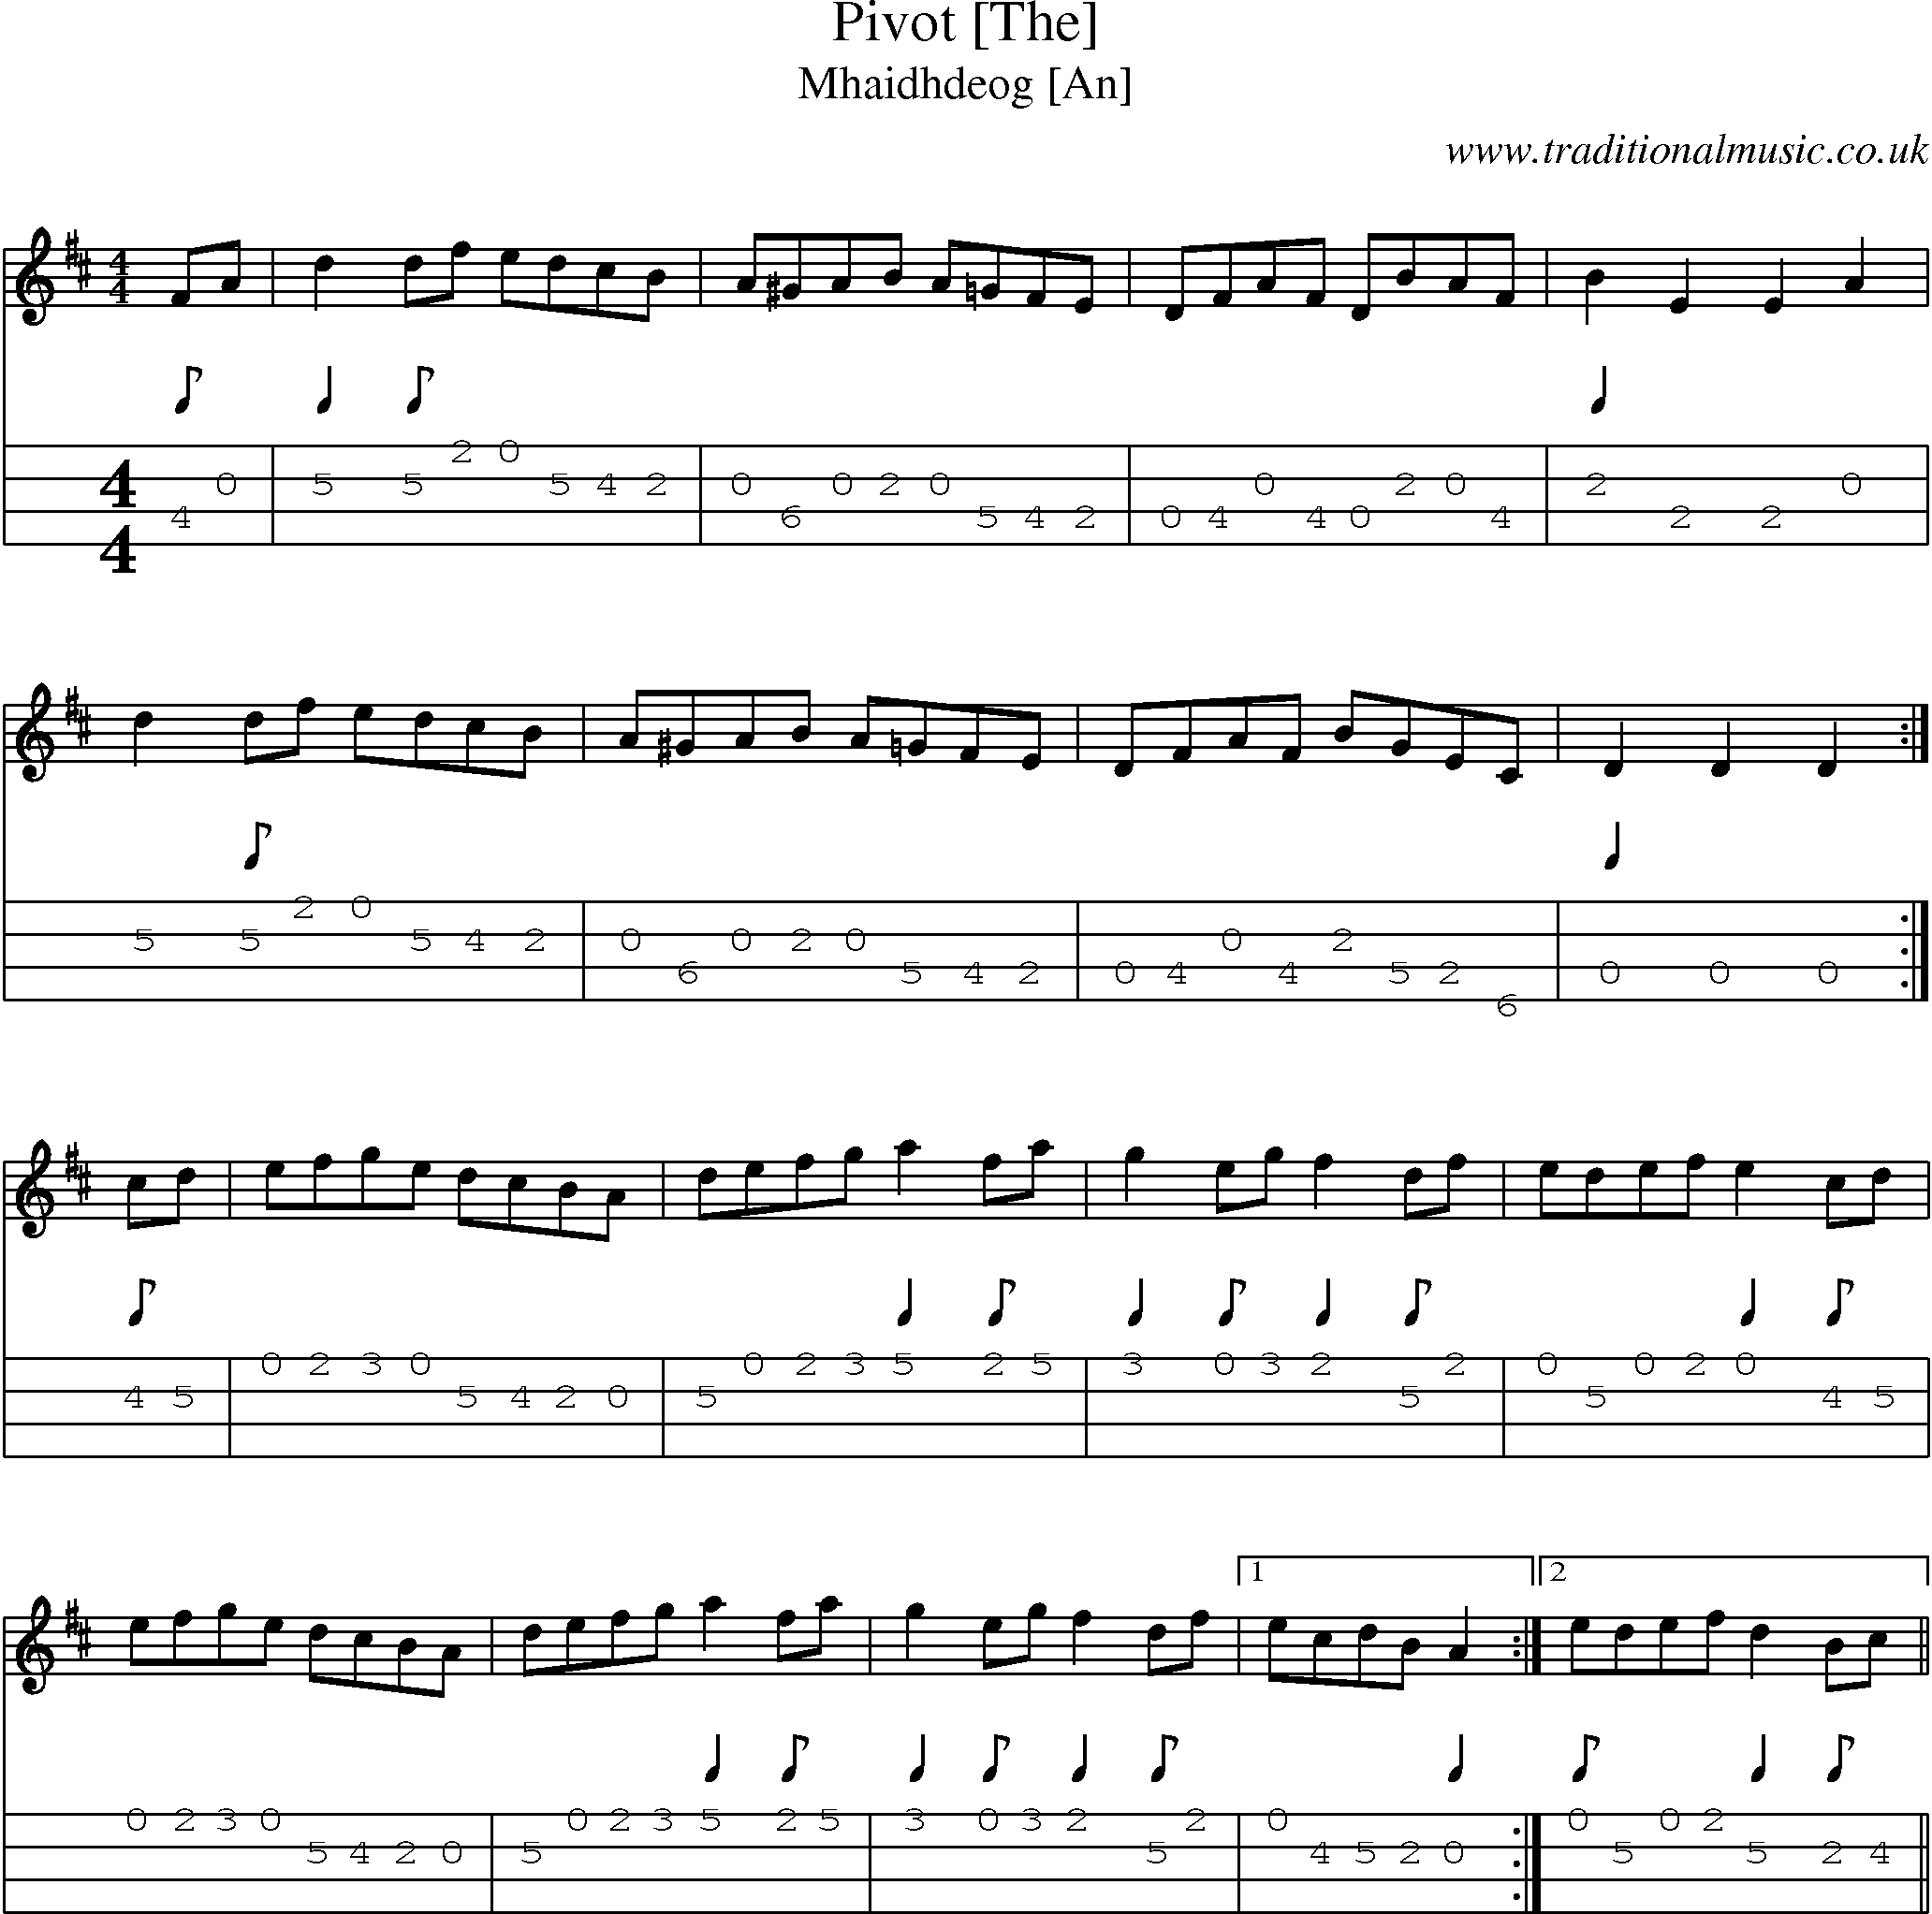 Music Score and Mandolin Tabs for Pivot